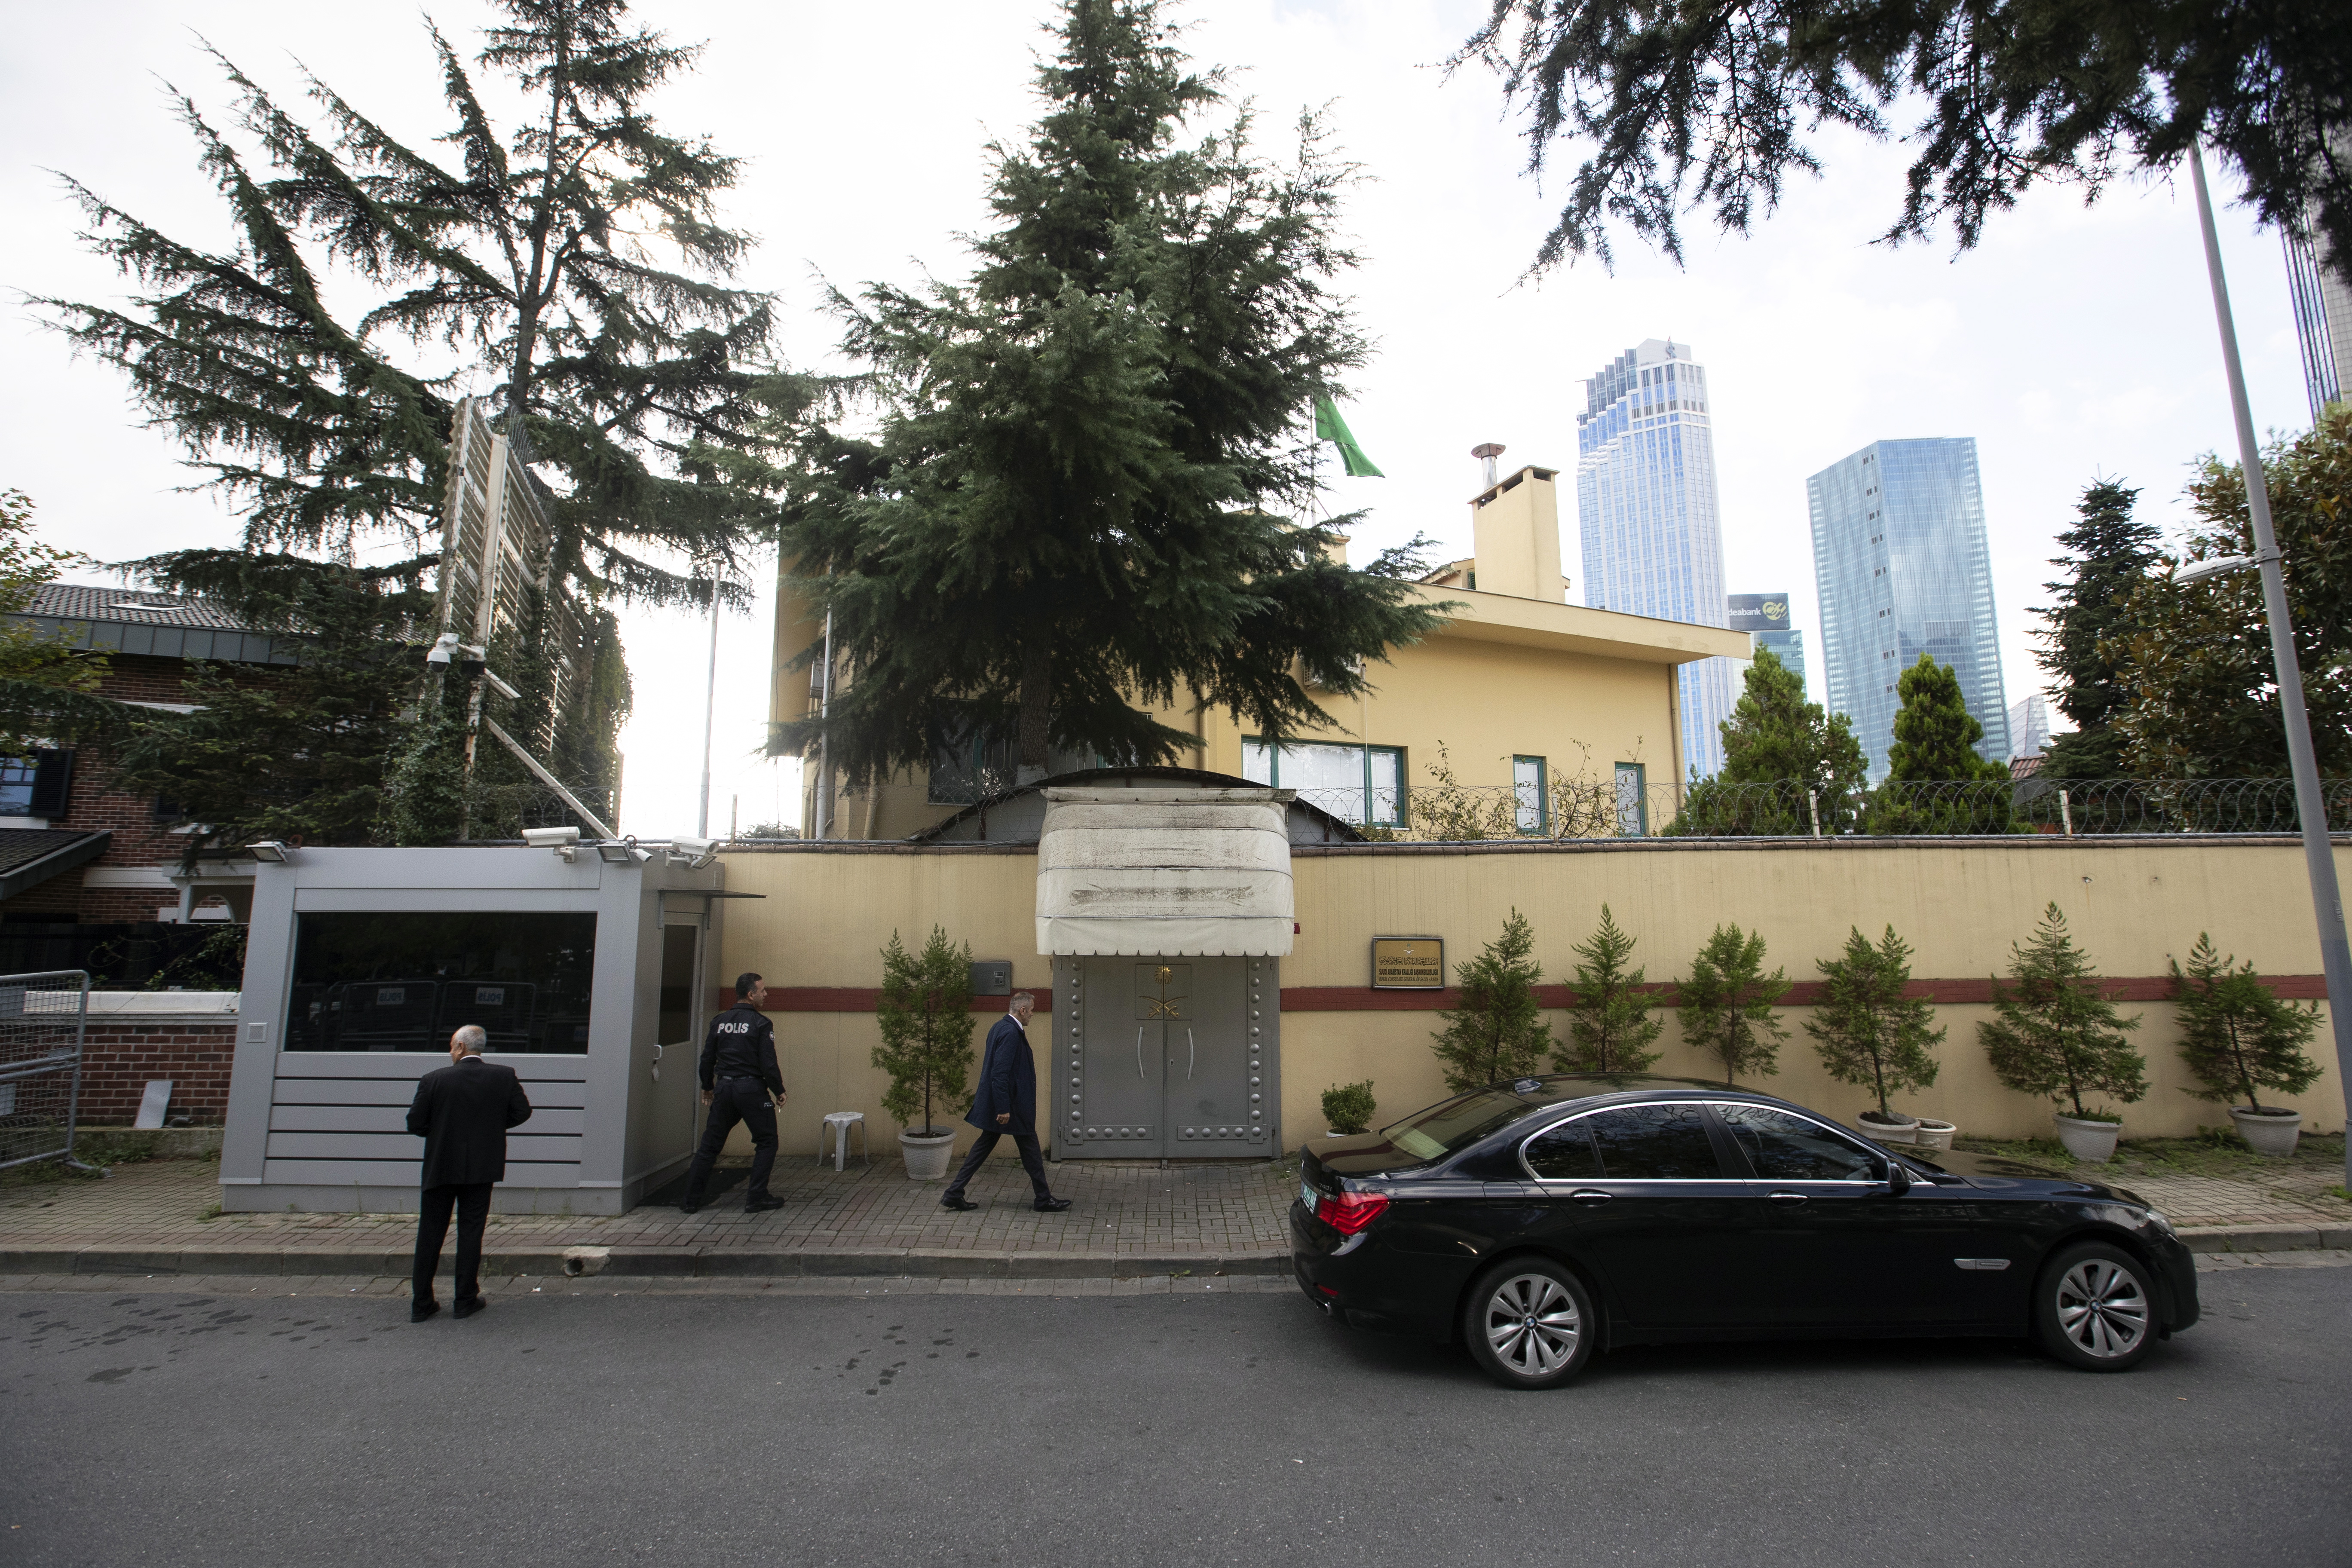 epa07082517 Officials and a Turkish policeman who is on duty for security of the consulate stand in front of the Saudi consulate in Istanbul, Turkey, 10 October 2018. Turkish President Recep Tayyip Erdogan on 07 October said he is following the developments on the disappearance of Saudi journalist Jamal Khashoggi, who has gone missing after visiting the Saudi consulate in Istanbul on 02 October to complete routine paperwork.   